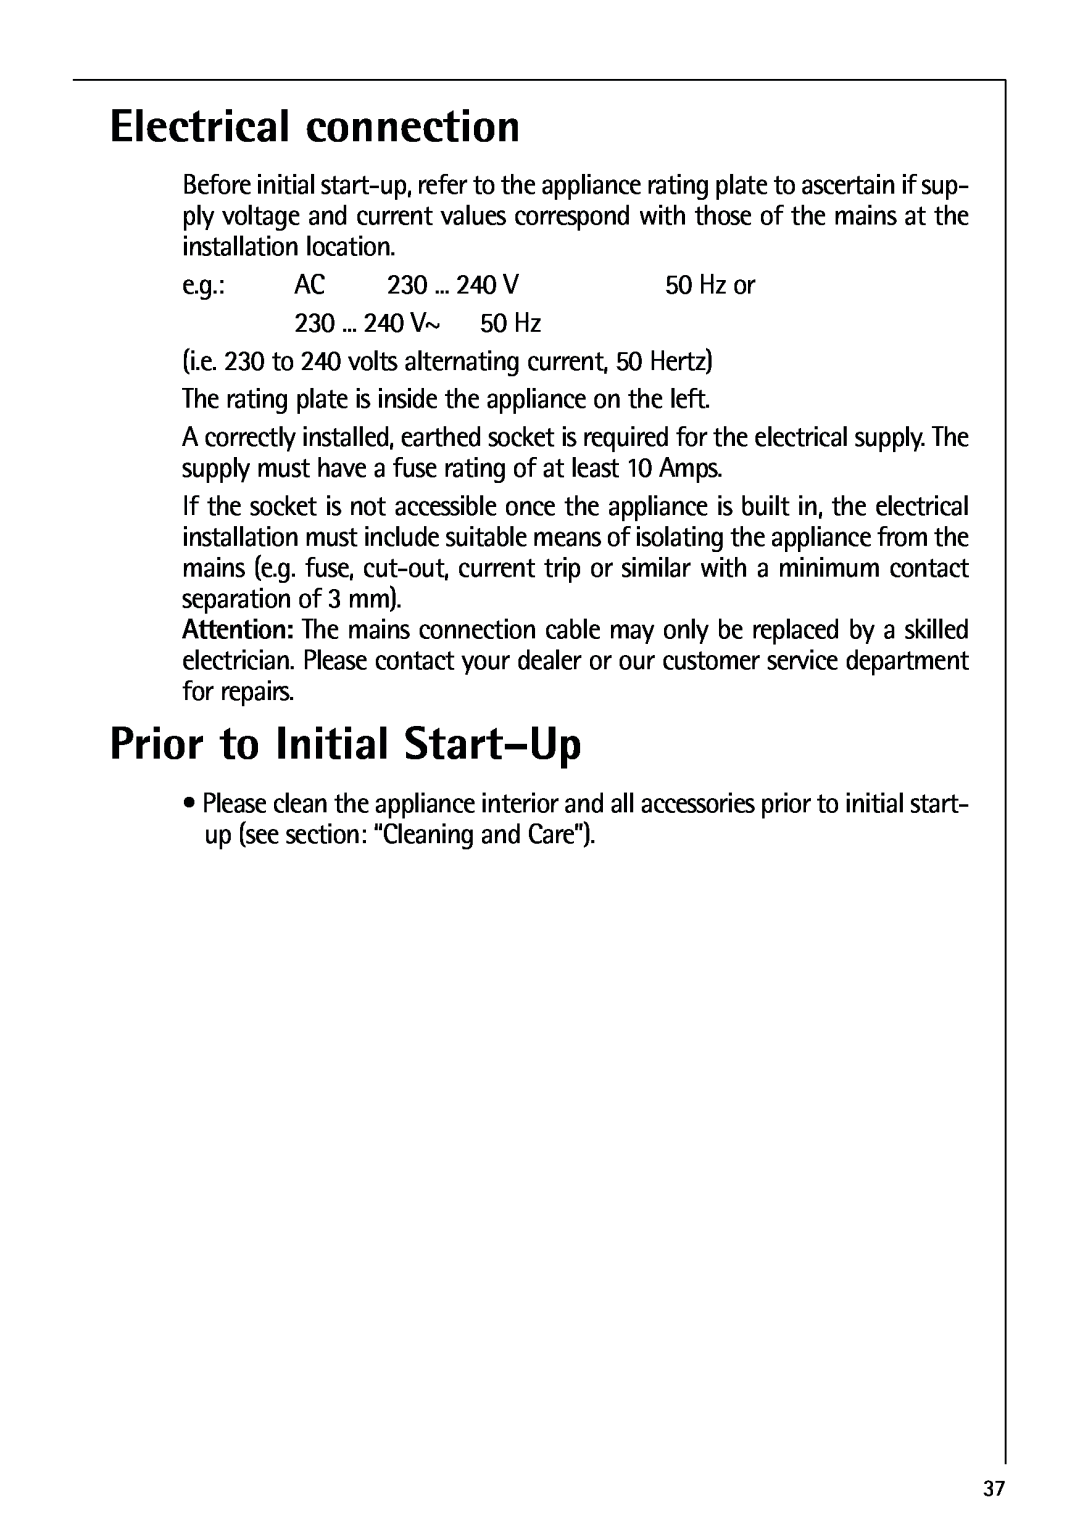 AEG 80318-5 KG user manual Electrical connection, Prior to Initial Start-Up 